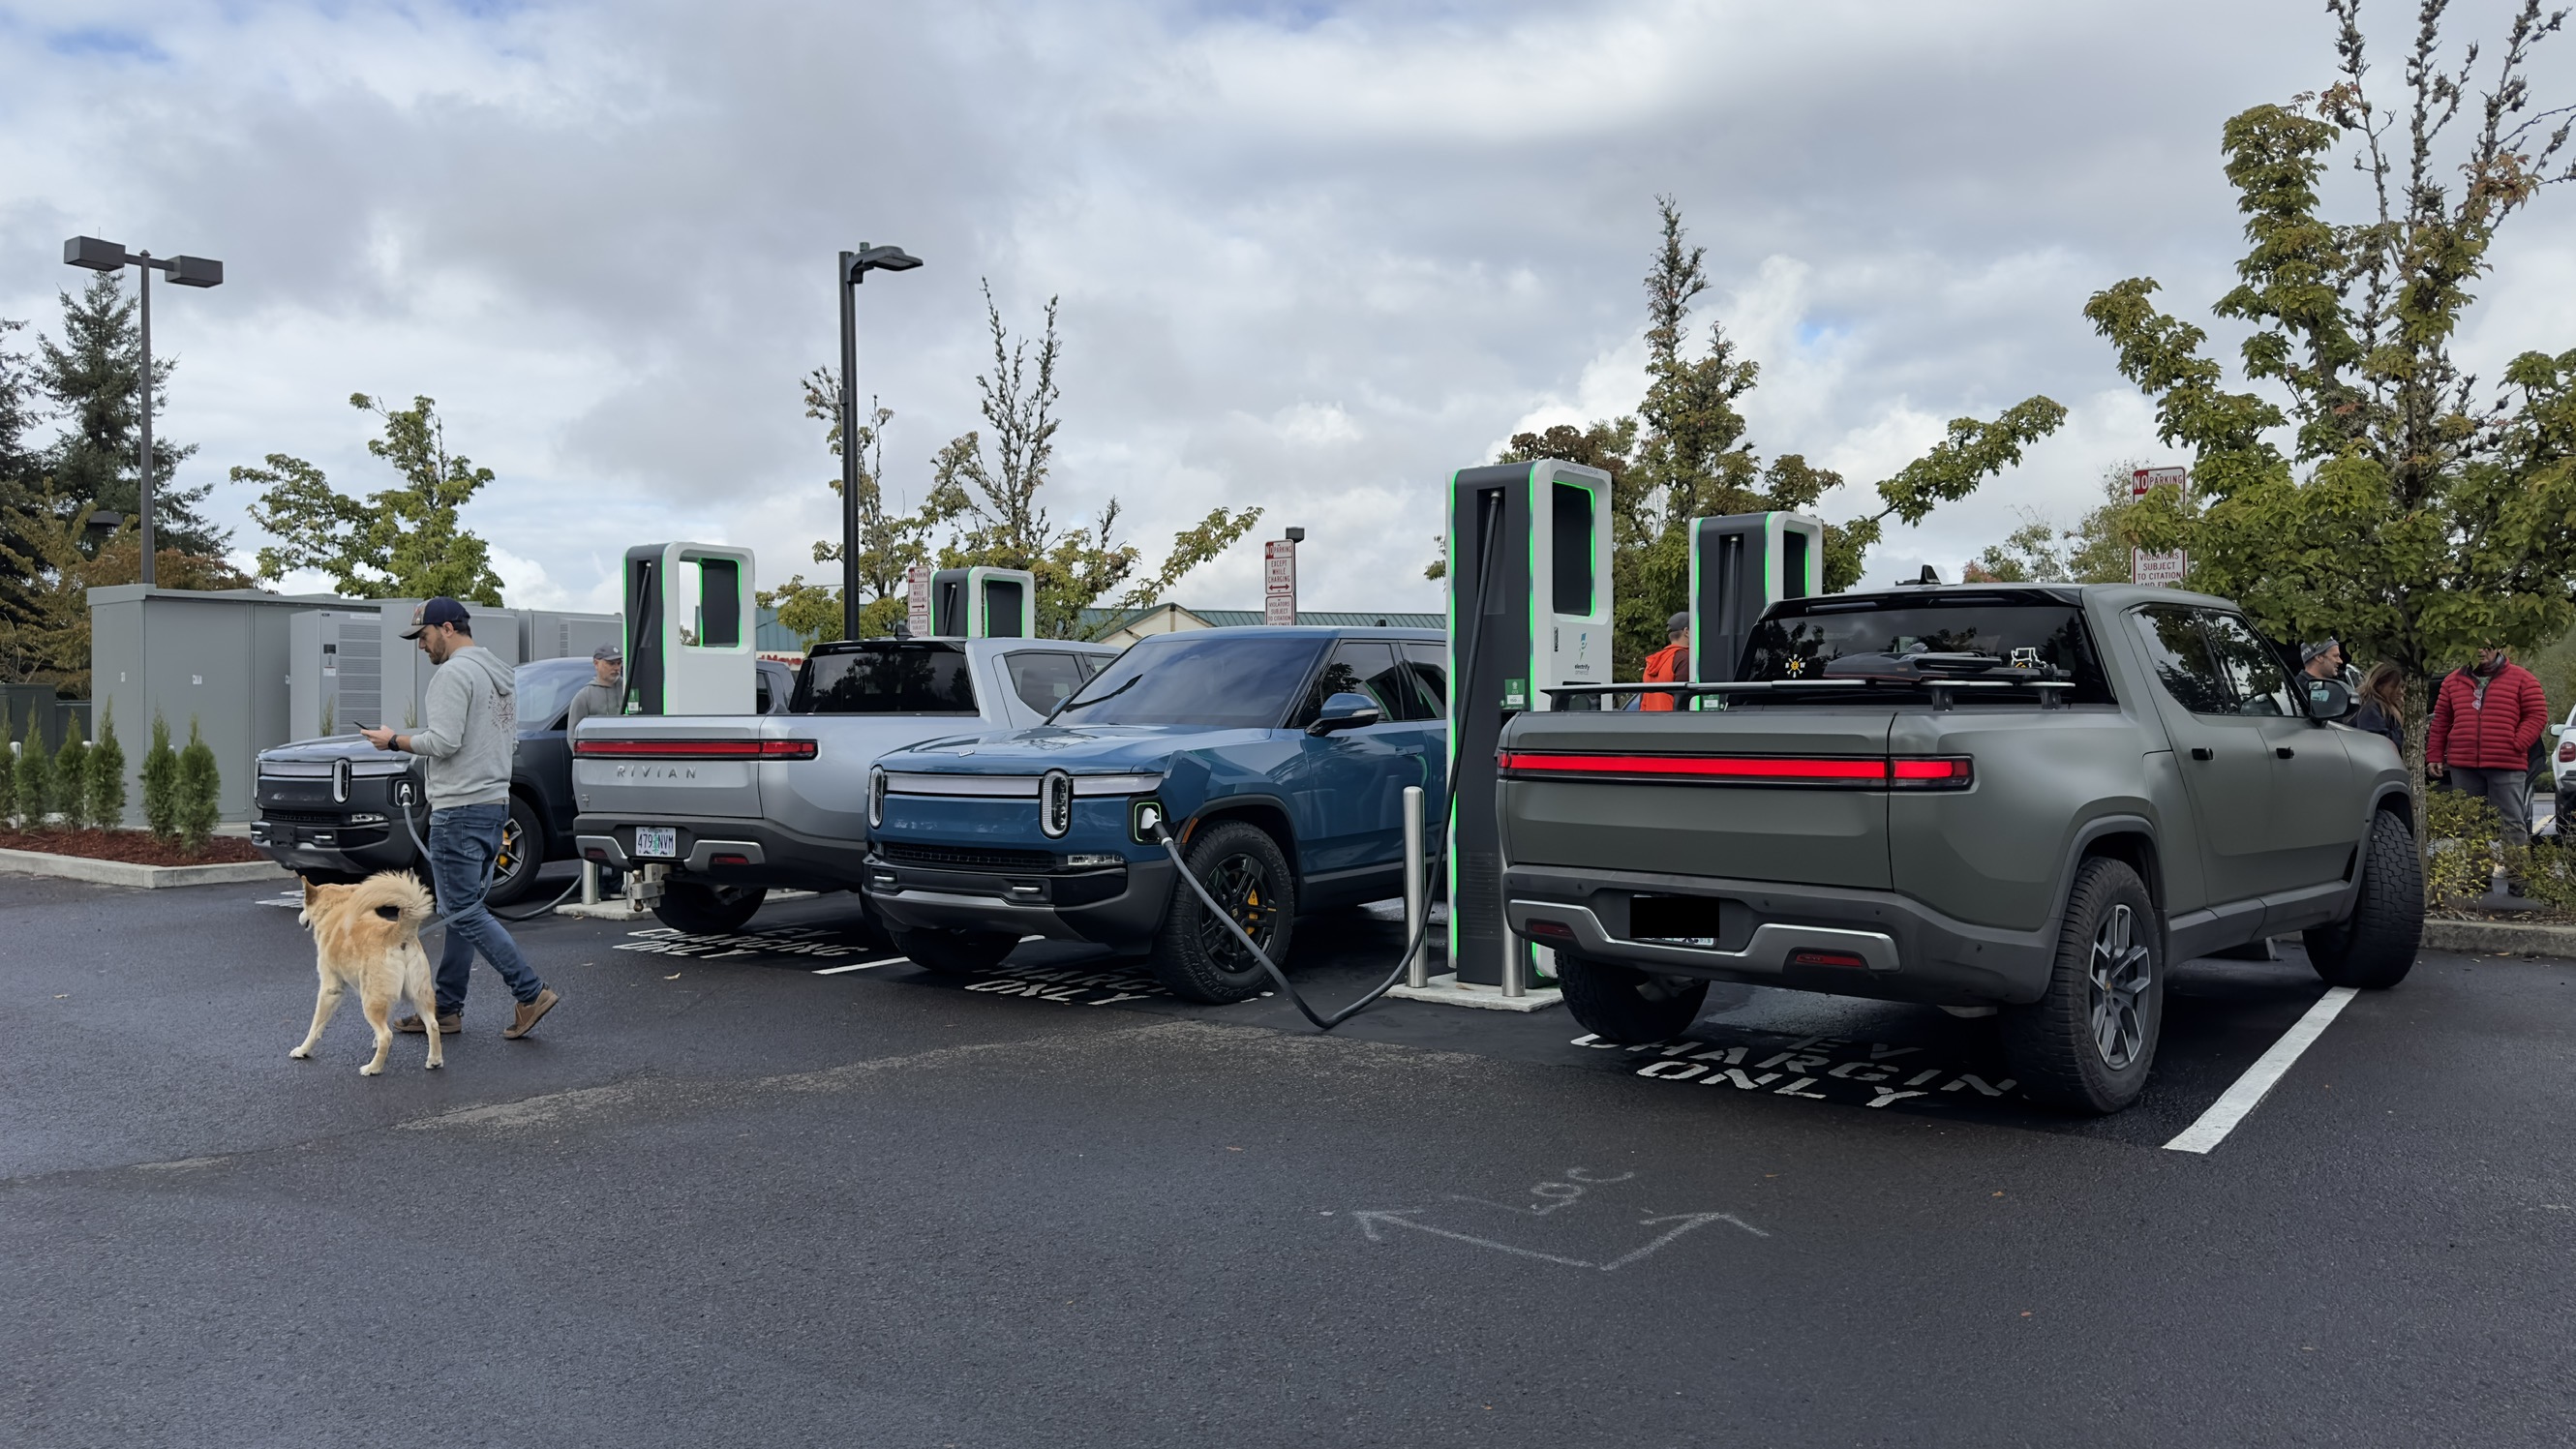 Rivian R1T R1S Proposed Group Trip: Mt. Hood - Hood River Loop on October 23rd. 4644F075-B8C7-47A9-9E01-D69E2A7B3707